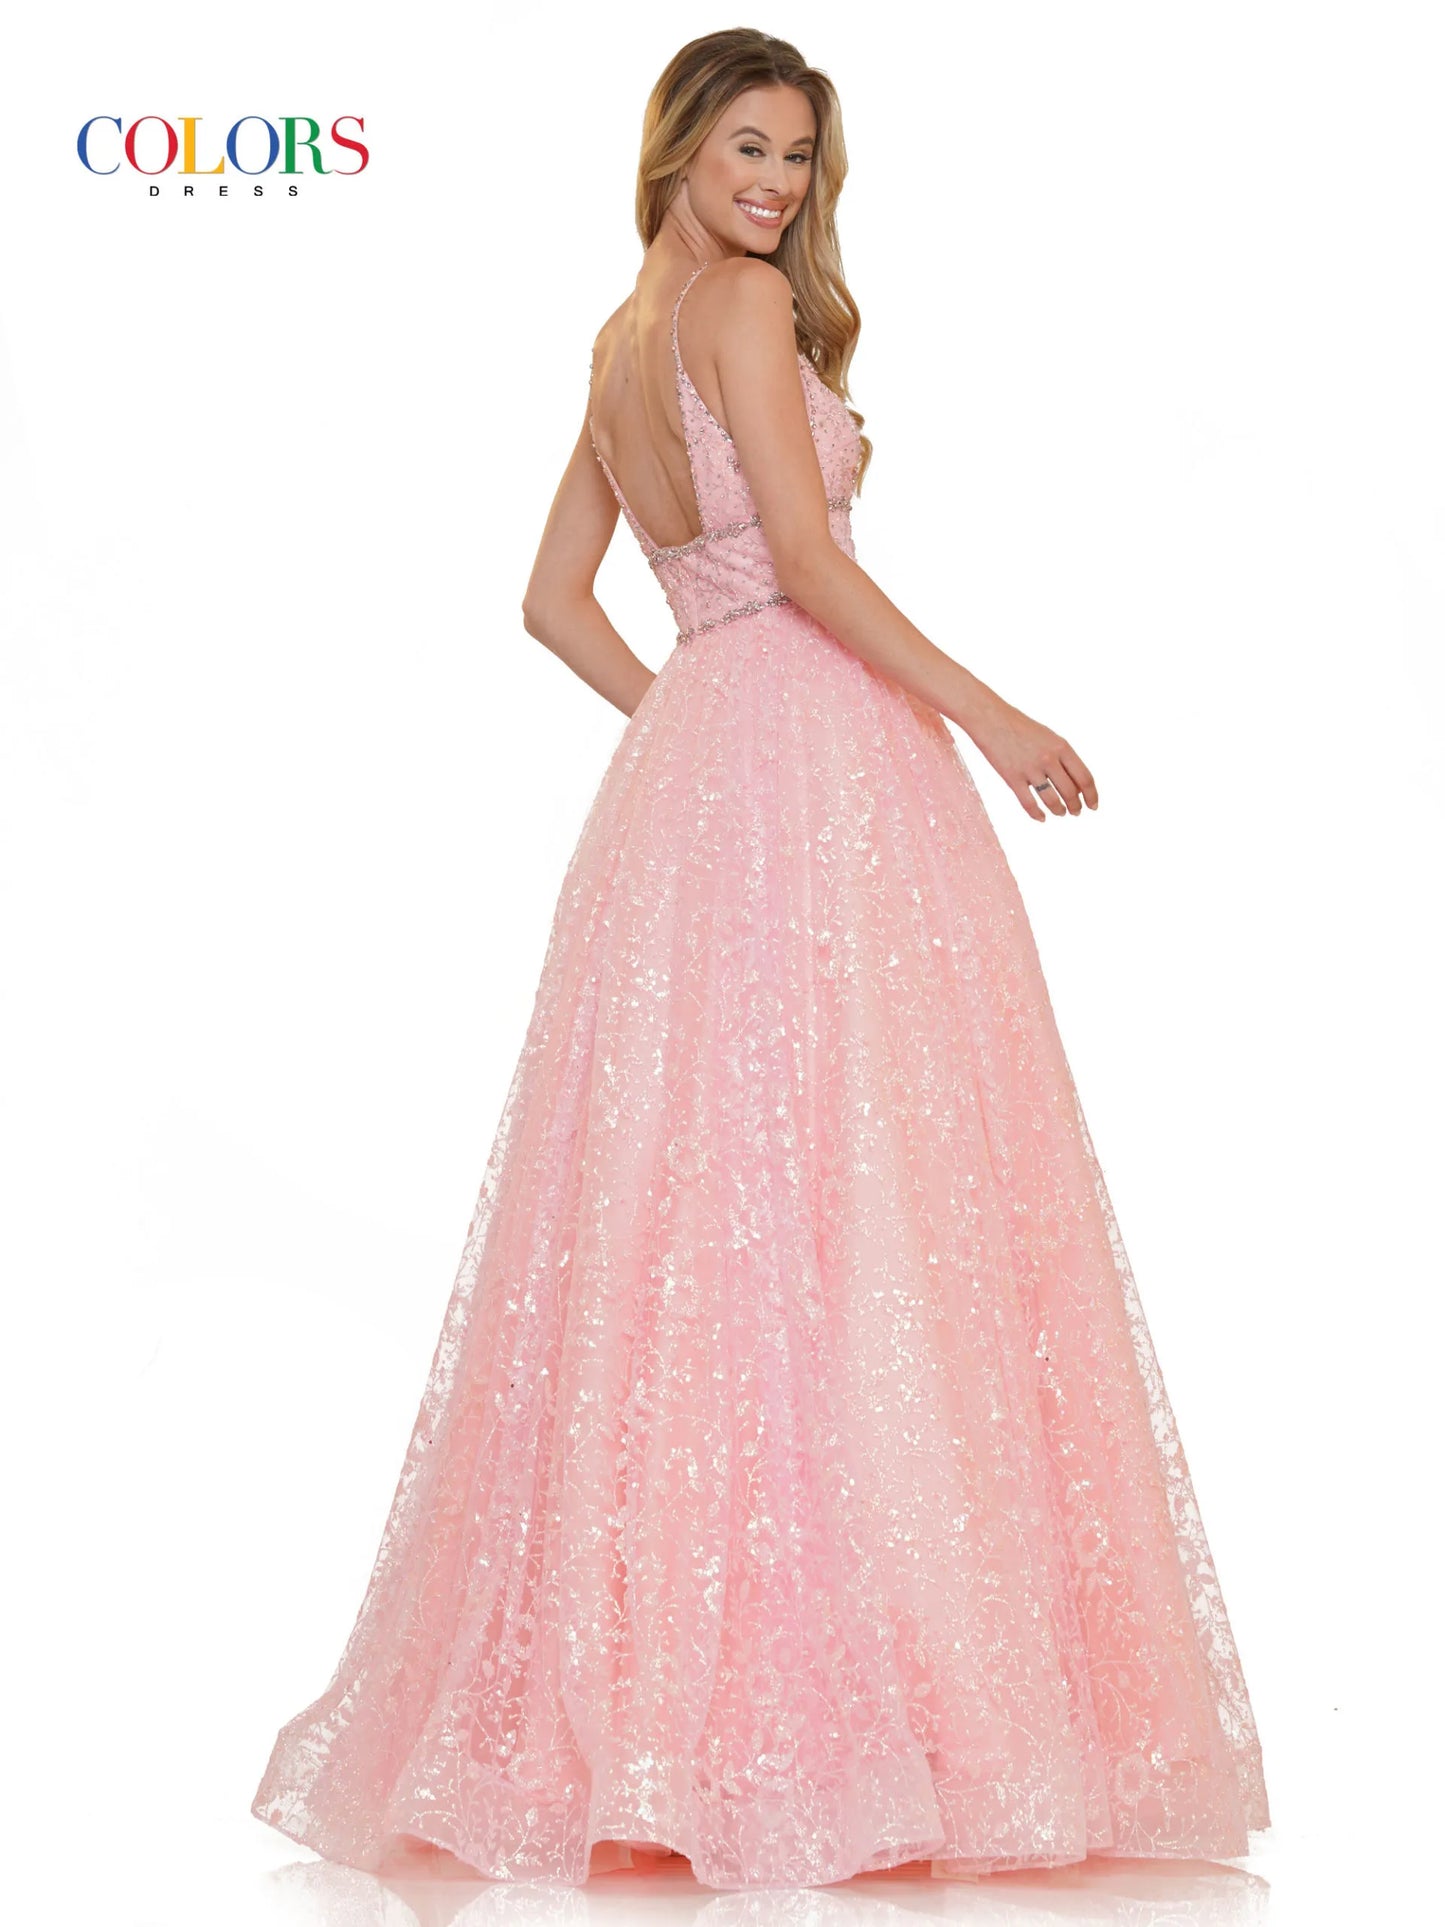 This stunning Colors Dress 2288 features a glittering sequin mesh ball gown with a plunging neckline and beautifully beaded bodice. Perfect for any formal event or pageant, this dress exudes elegance and sophistication. Make a statement and stand out from the crowd in this glamorous gown.